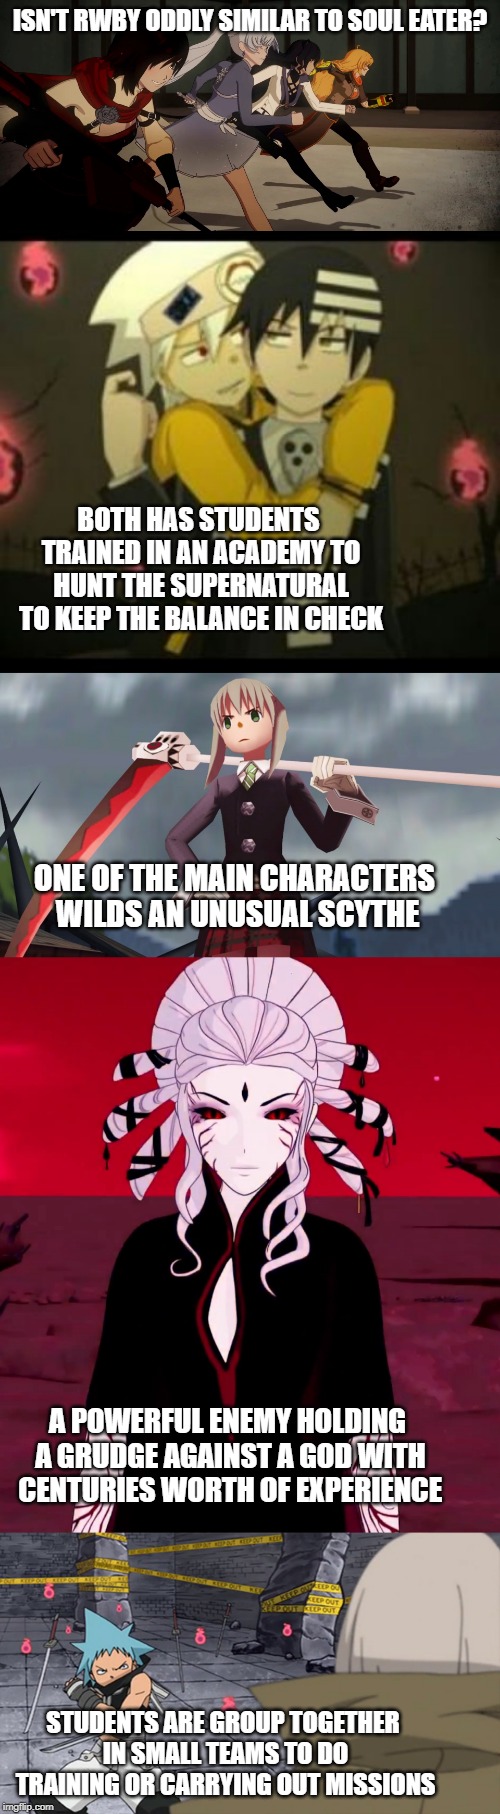  ISN'T RWBY ODDLY SIMILAR TO SOUL EATER? BOTH HAS STUDENTS TRAINED IN AN ACADEMY TO HUNT THE SUPERNATURAL TO KEEP THE BALANCE IN CHECK; ONE OF THE MAIN CHARACTERS WILDS AN UNUSUAL SCYTHE; A POWERFUL ENEMY HOLDING A GRUDGE AGAINST A GOD WITH CENTURIES WORTH OF EXPERIENCE; STUDENTS ARE GROUP TOGETHER IN SMALL TEAMS TO DO TRAINING OR CARRYING OUT MISSIONS | image tagged in rwby,soul eater,supernatural | made w/ Imgflip meme maker